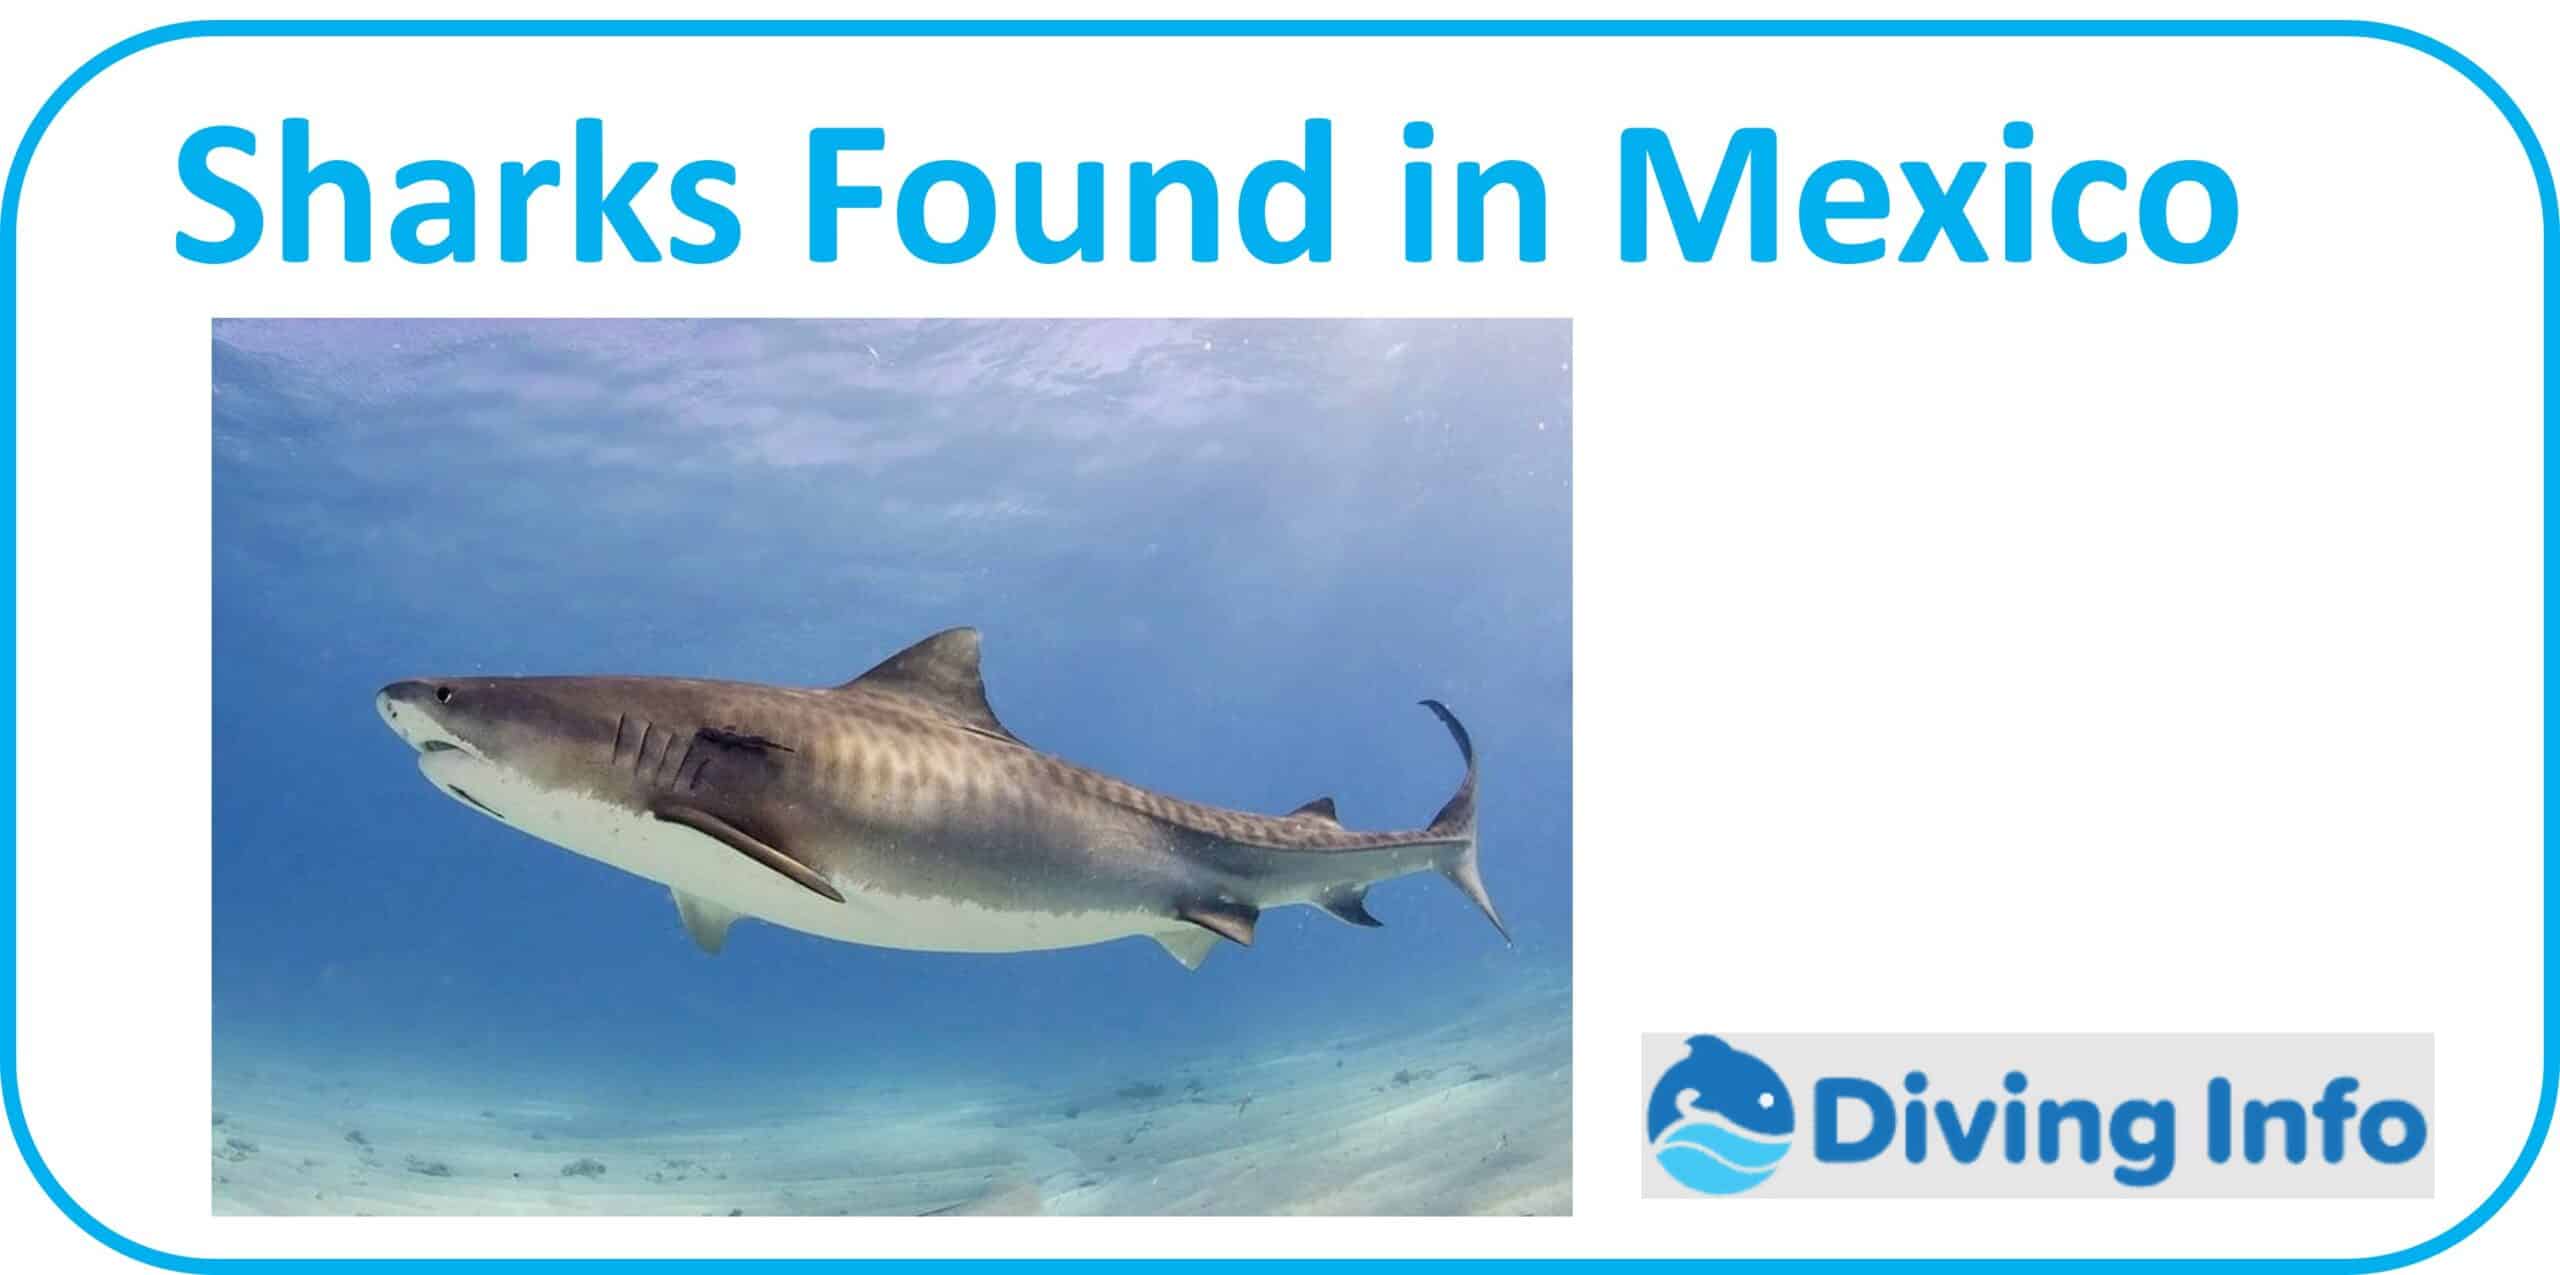 Types of Sharks Found in Mexico